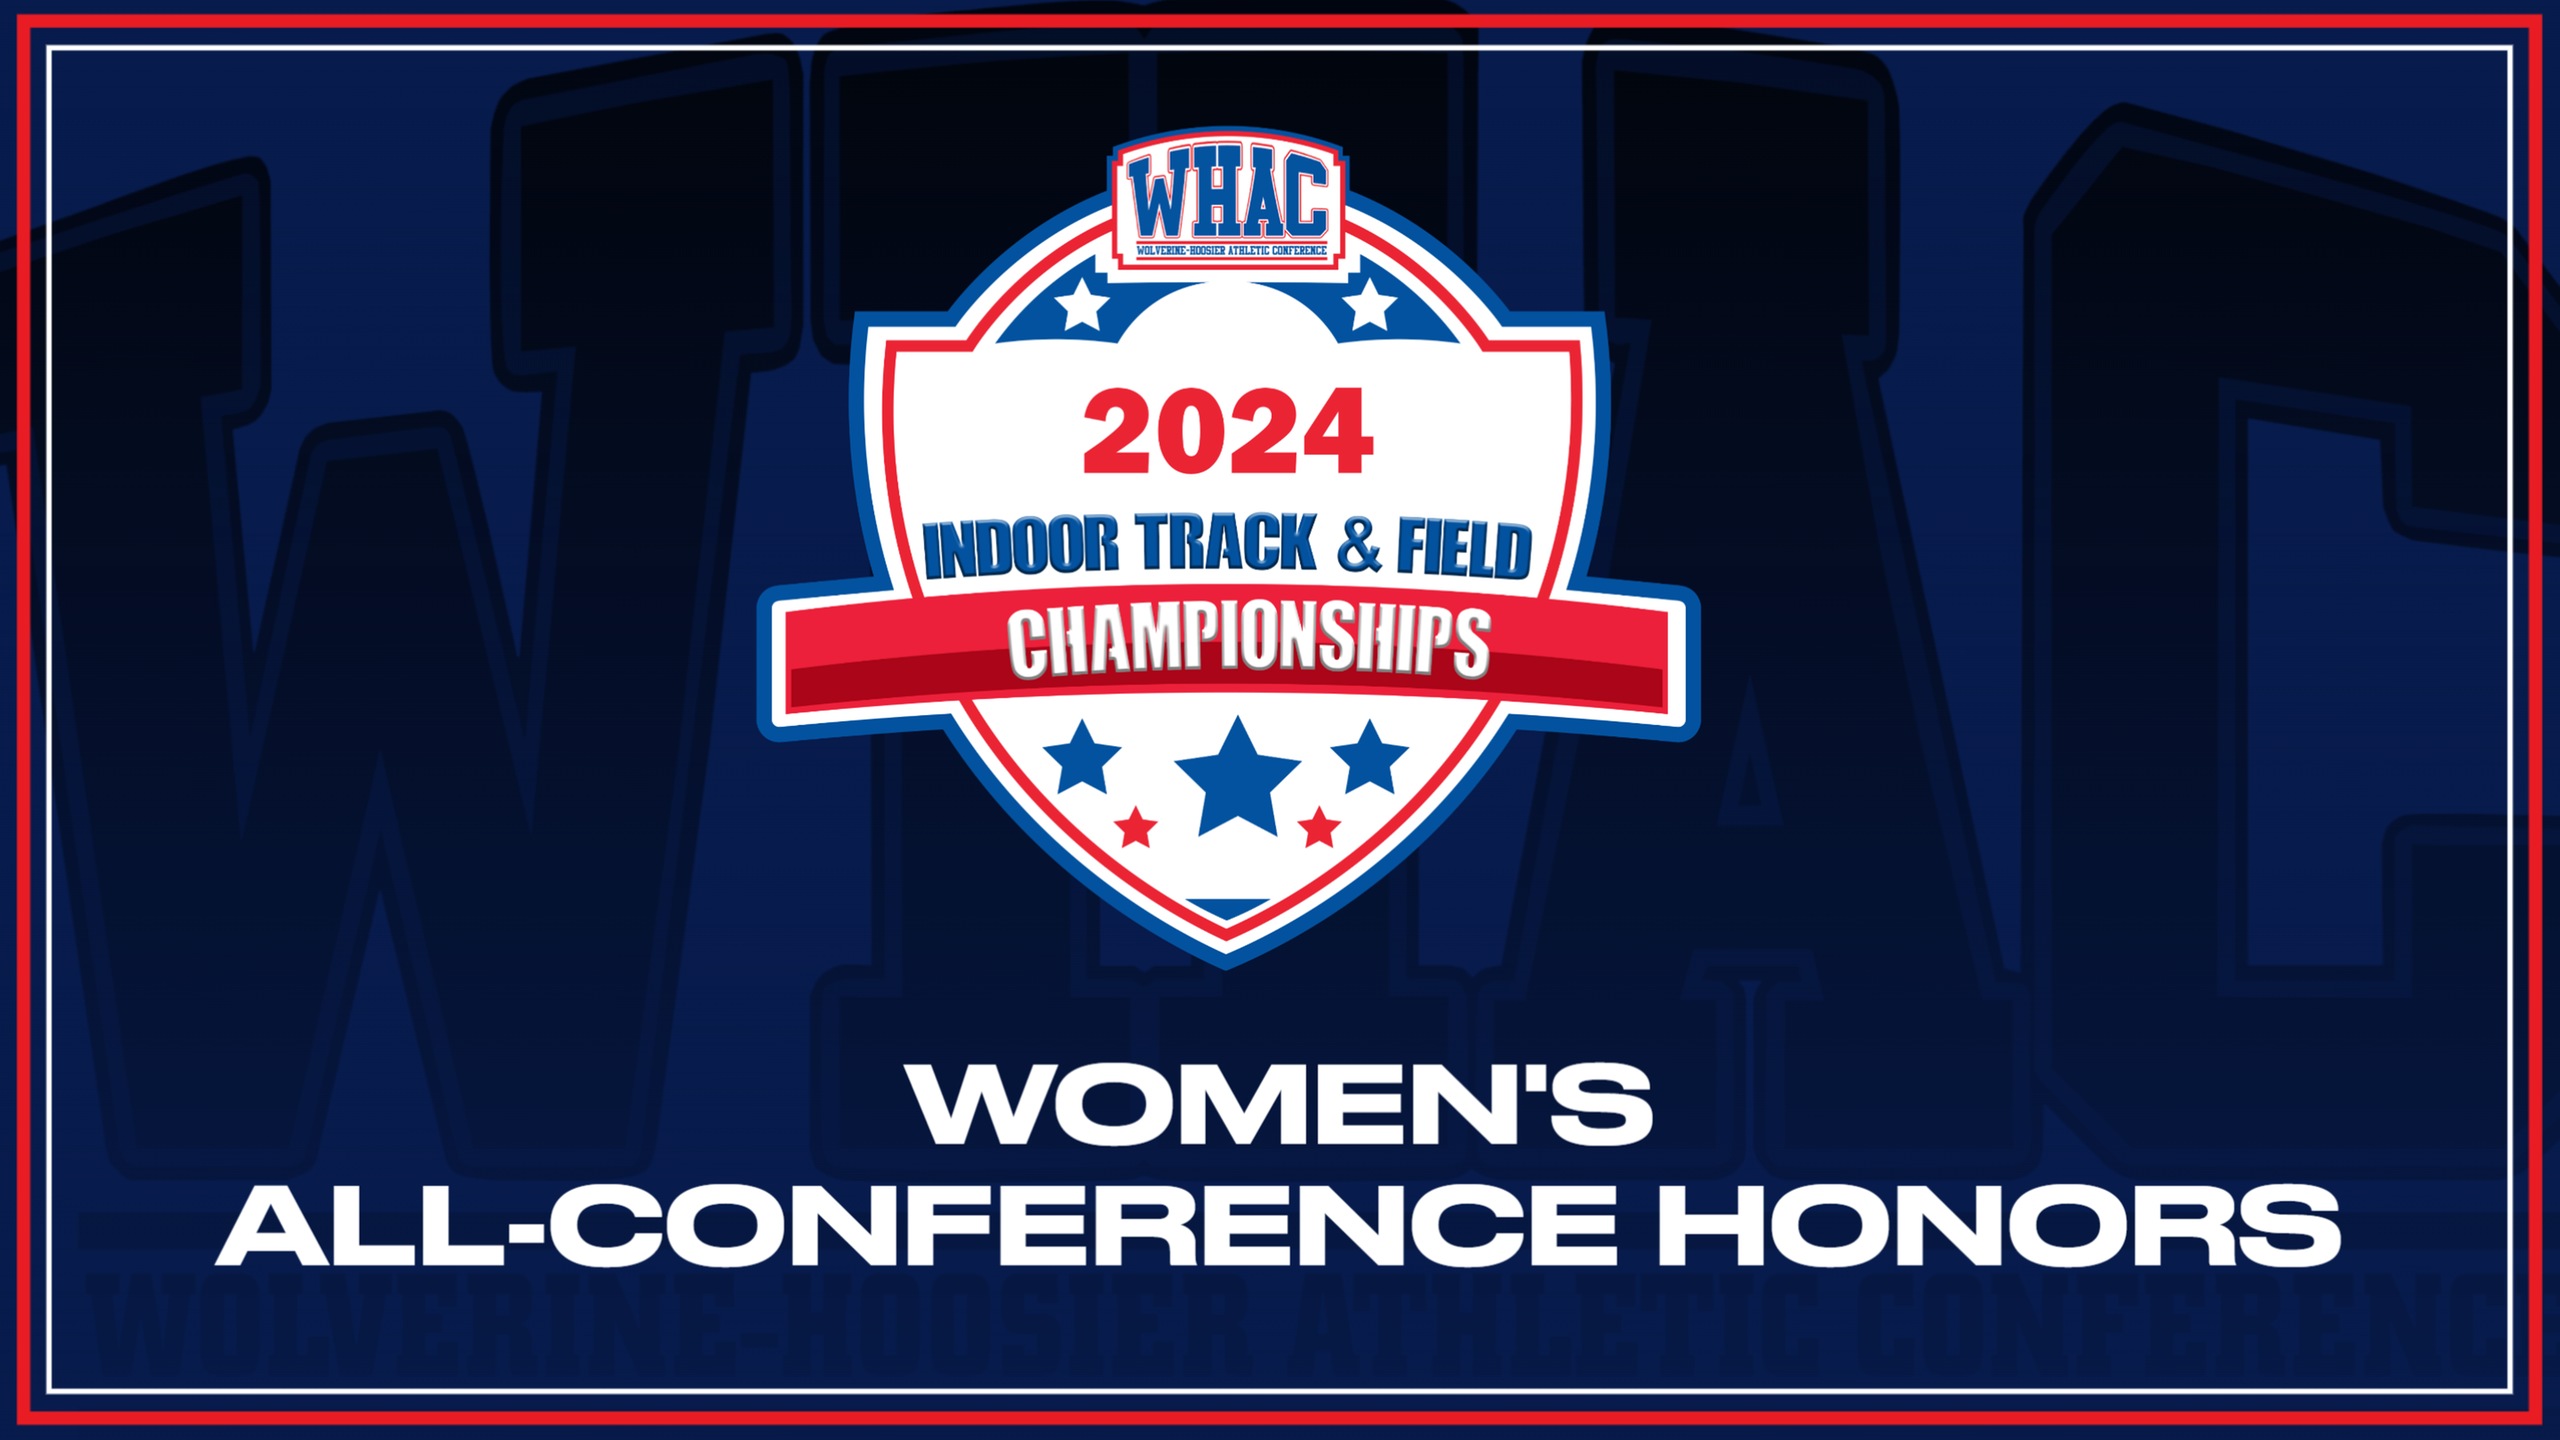 2024 Women's Indoor Track & Field Honors Announced